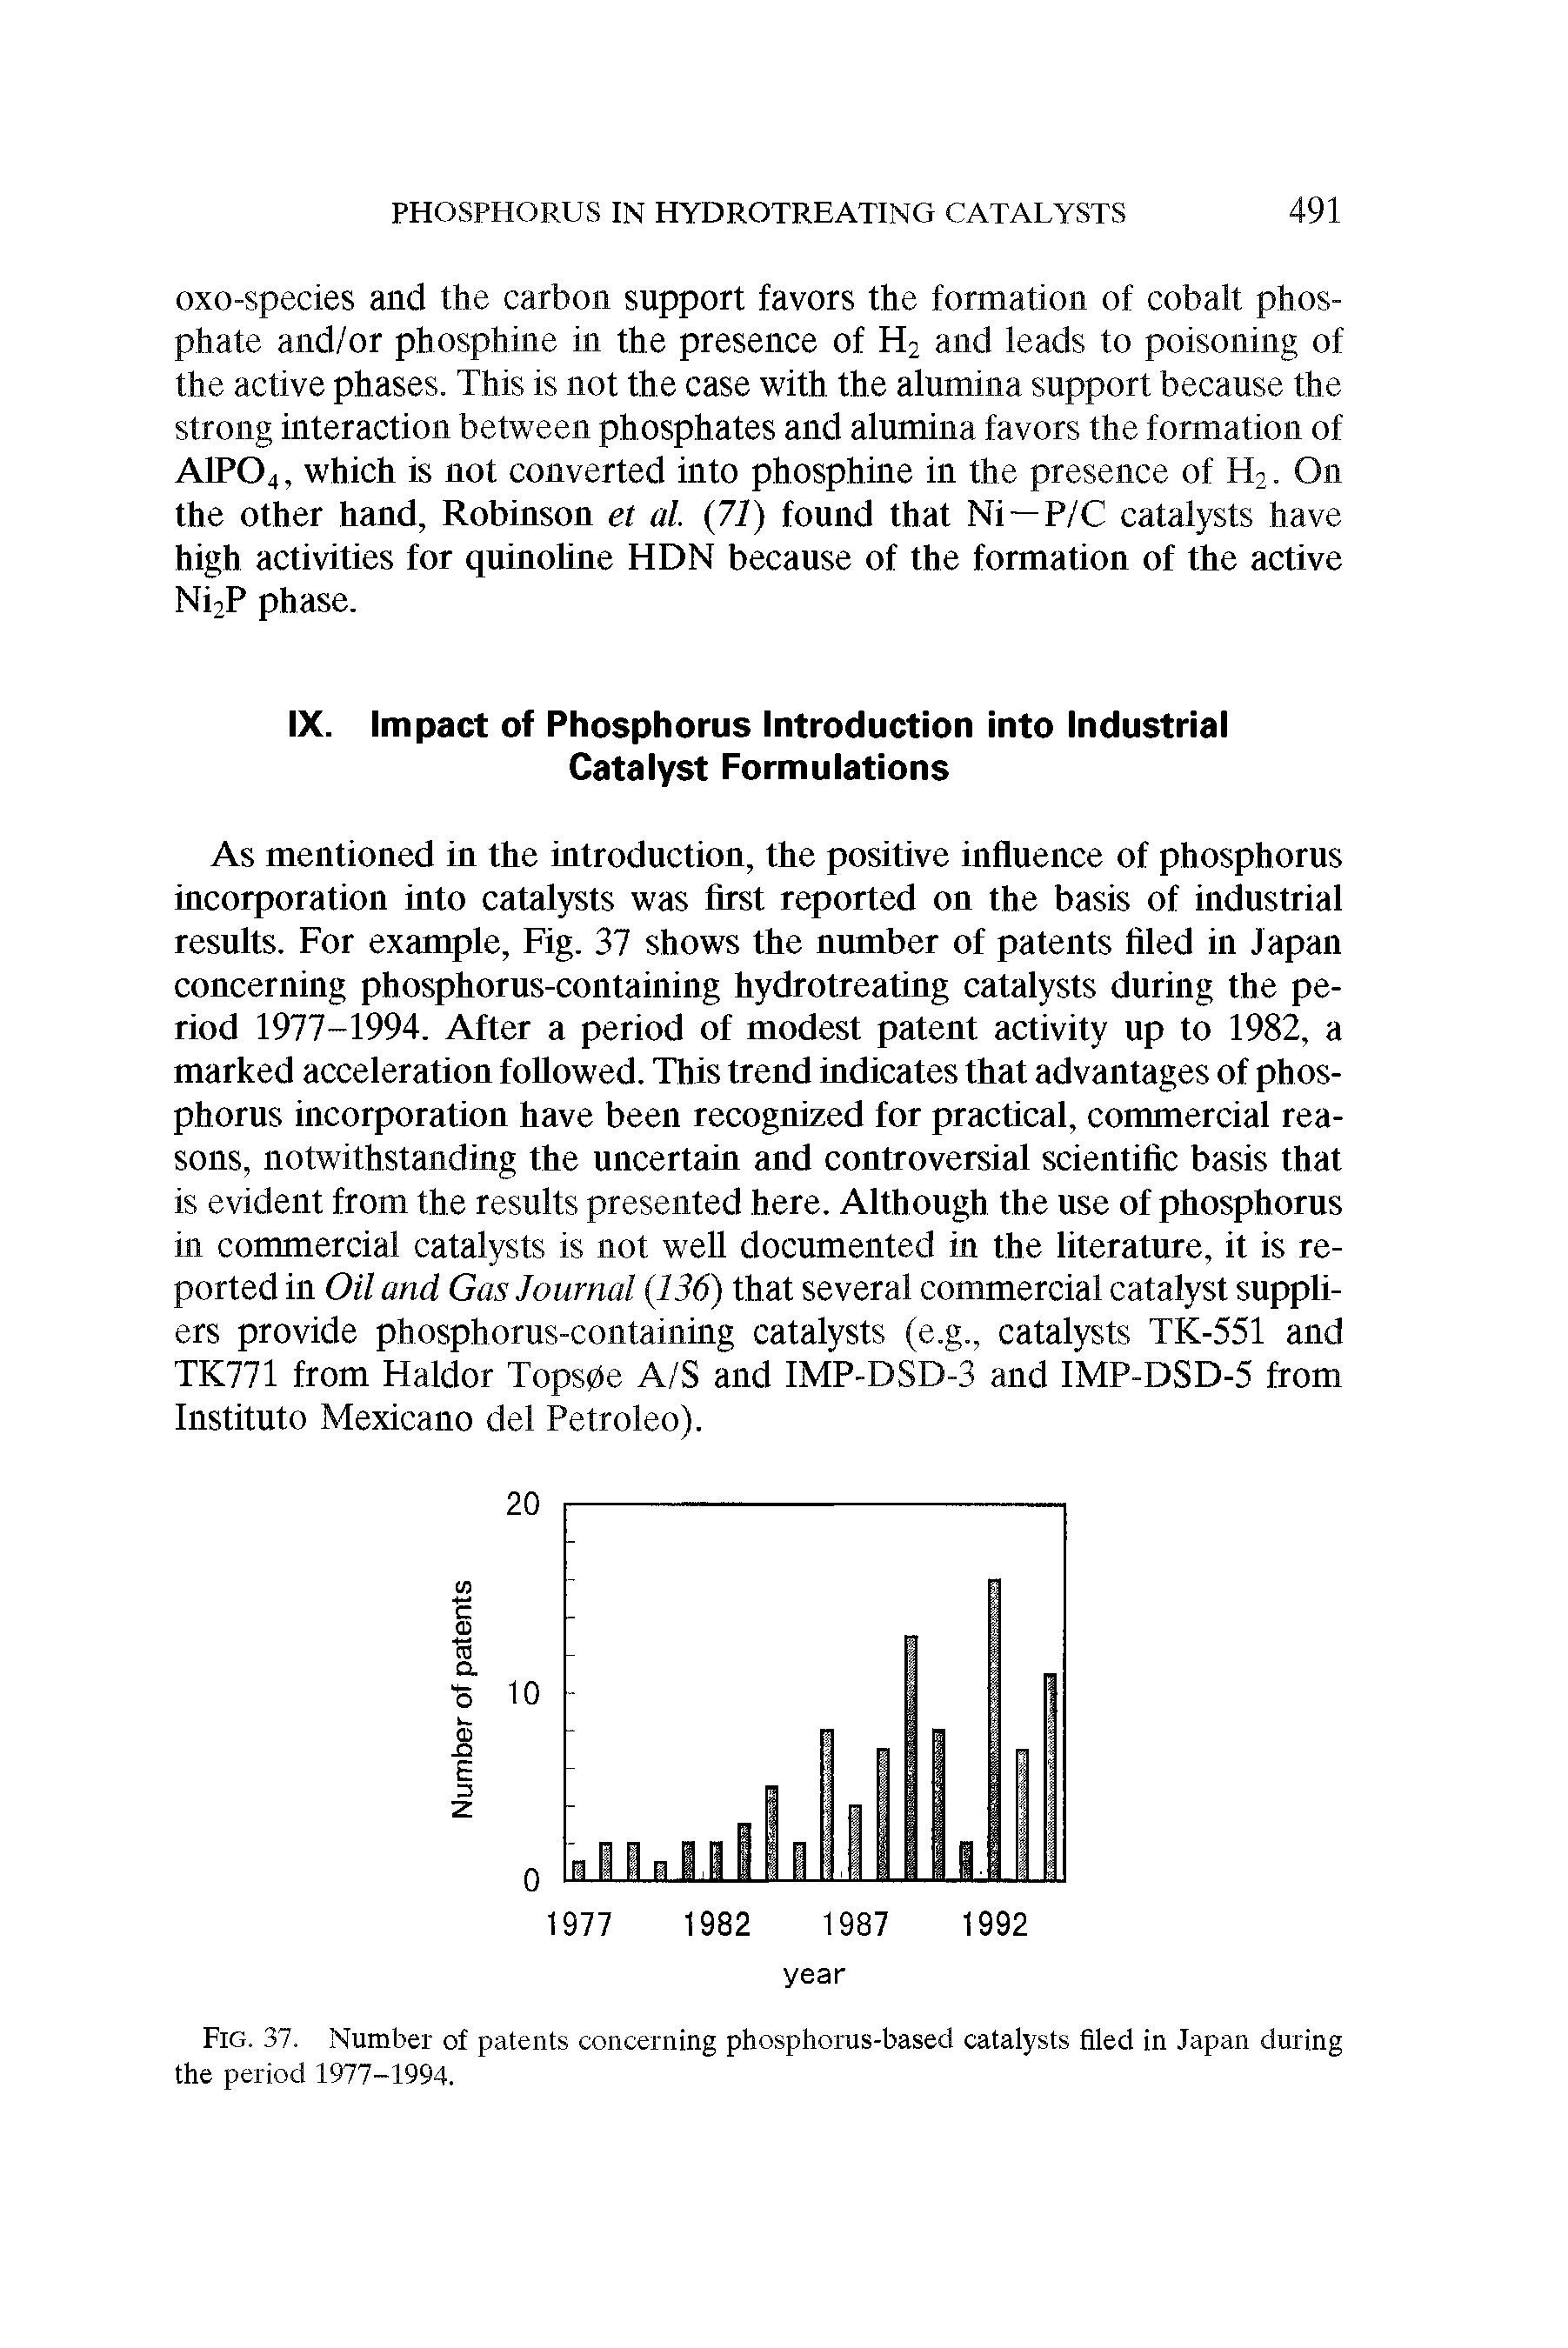 Fig. 37. Number of patents concerning phosphorus-based catalysts filed in Japan during the period 1977-1994.